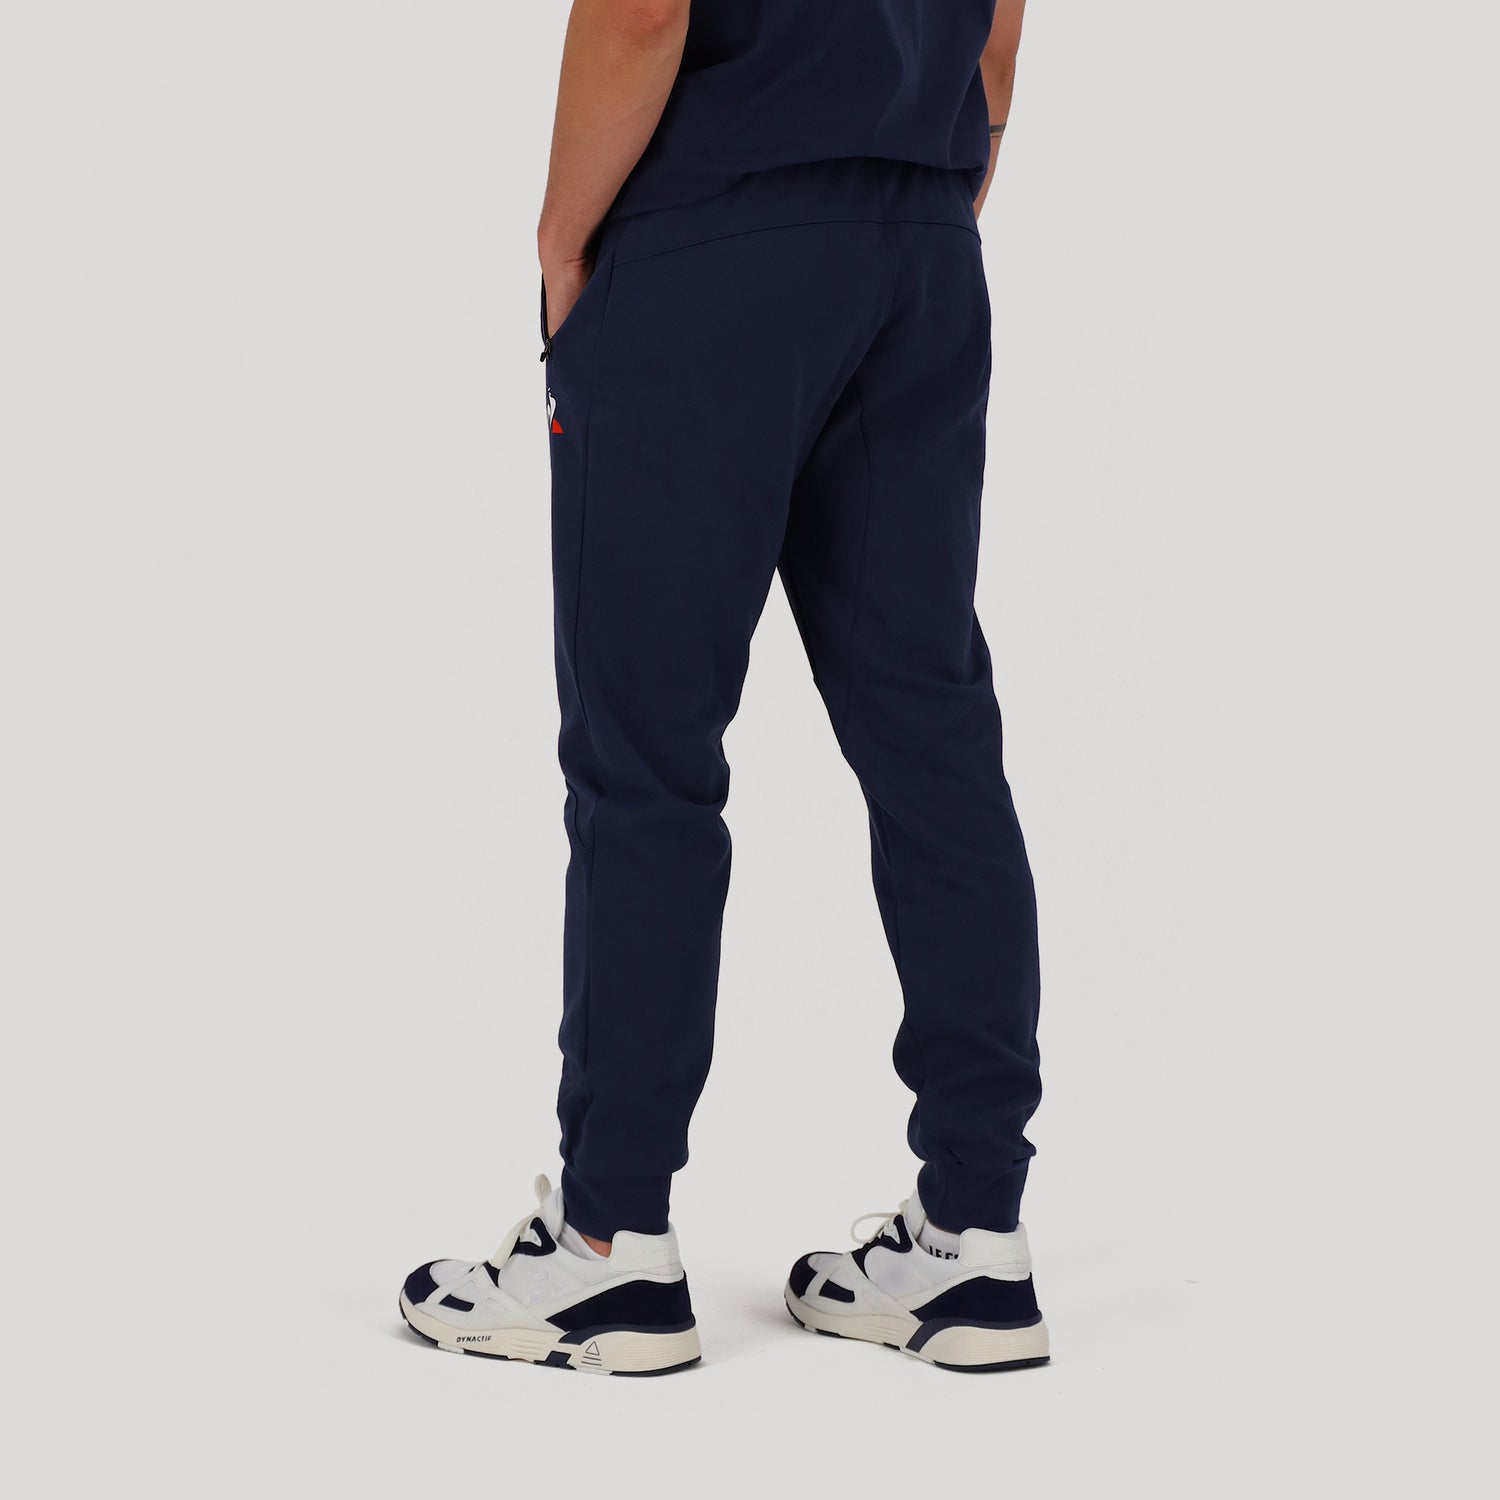 2221302-EFRO 22 Pant PRES N°1 M dress blues  | Trousers for men